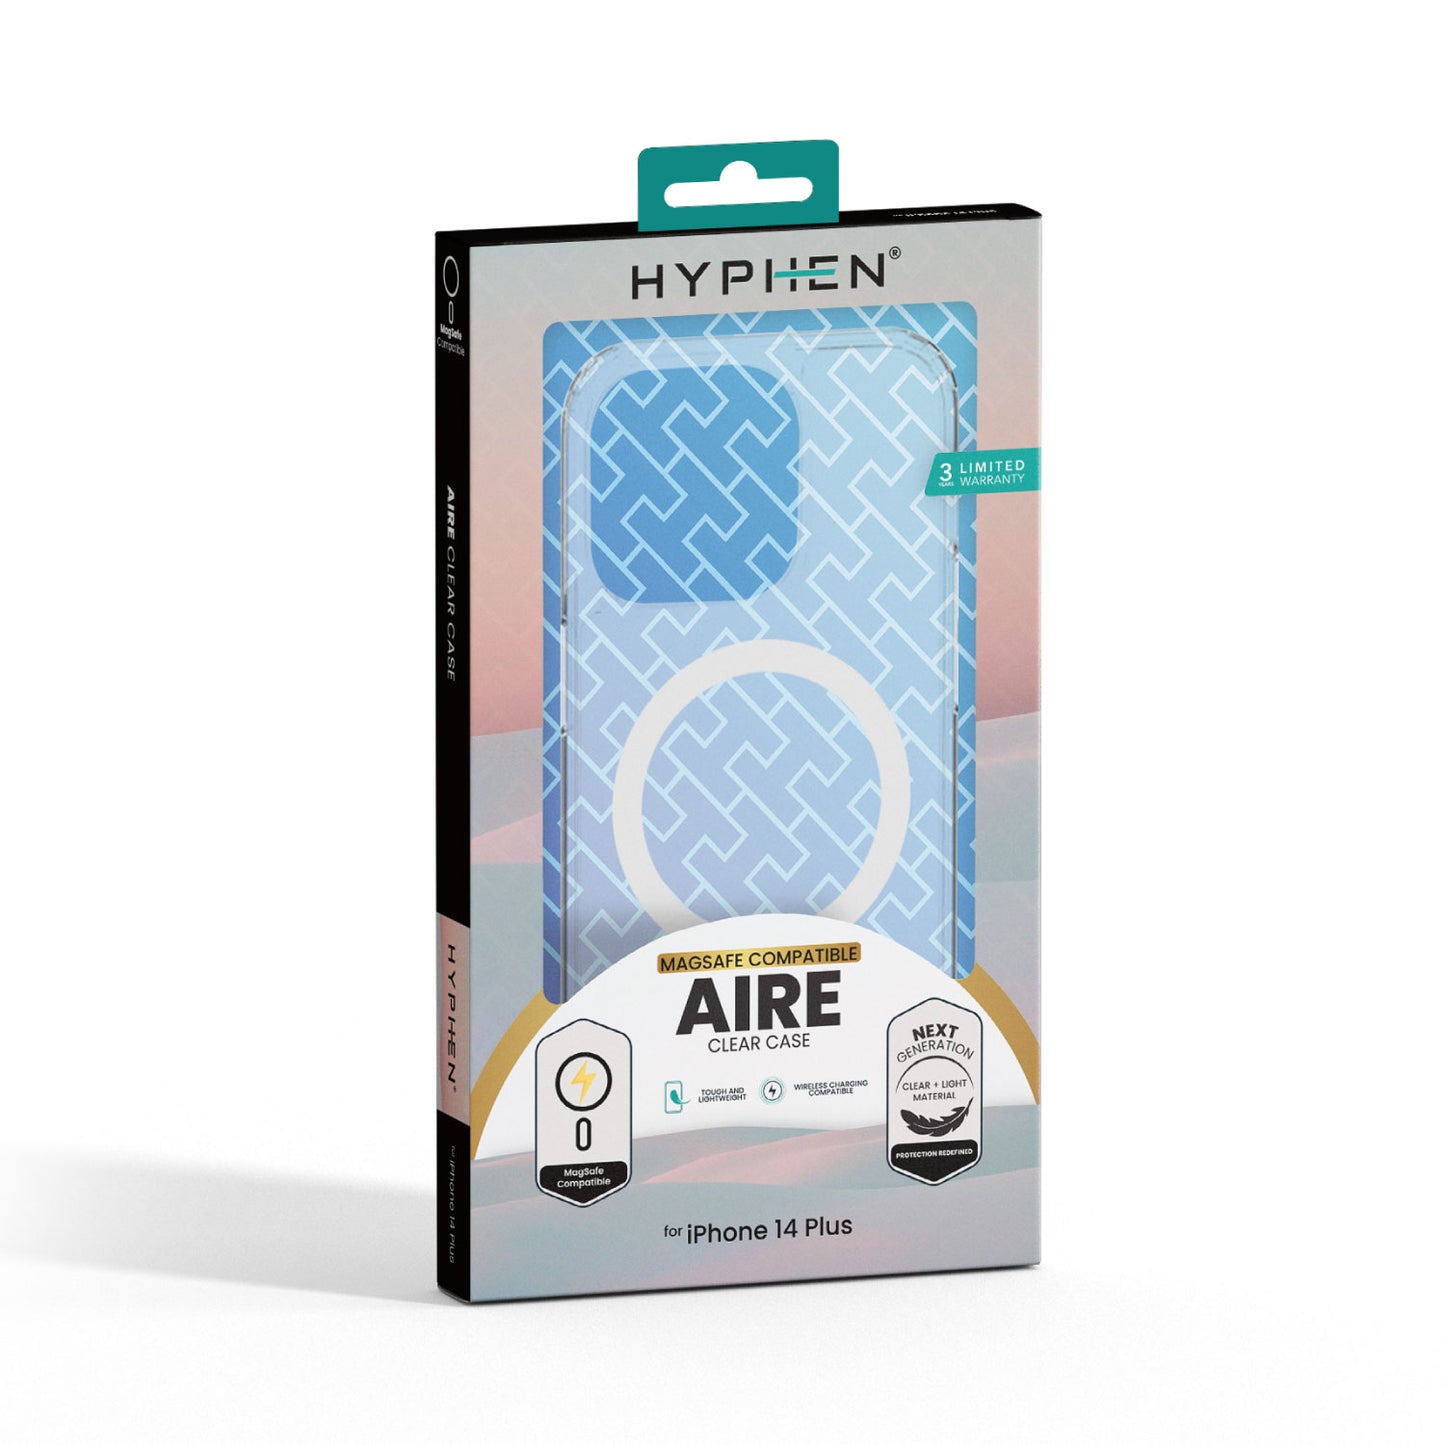 HYPHEN AIRE MagSafe Clear Case - iPhone 14 Plus (2022)